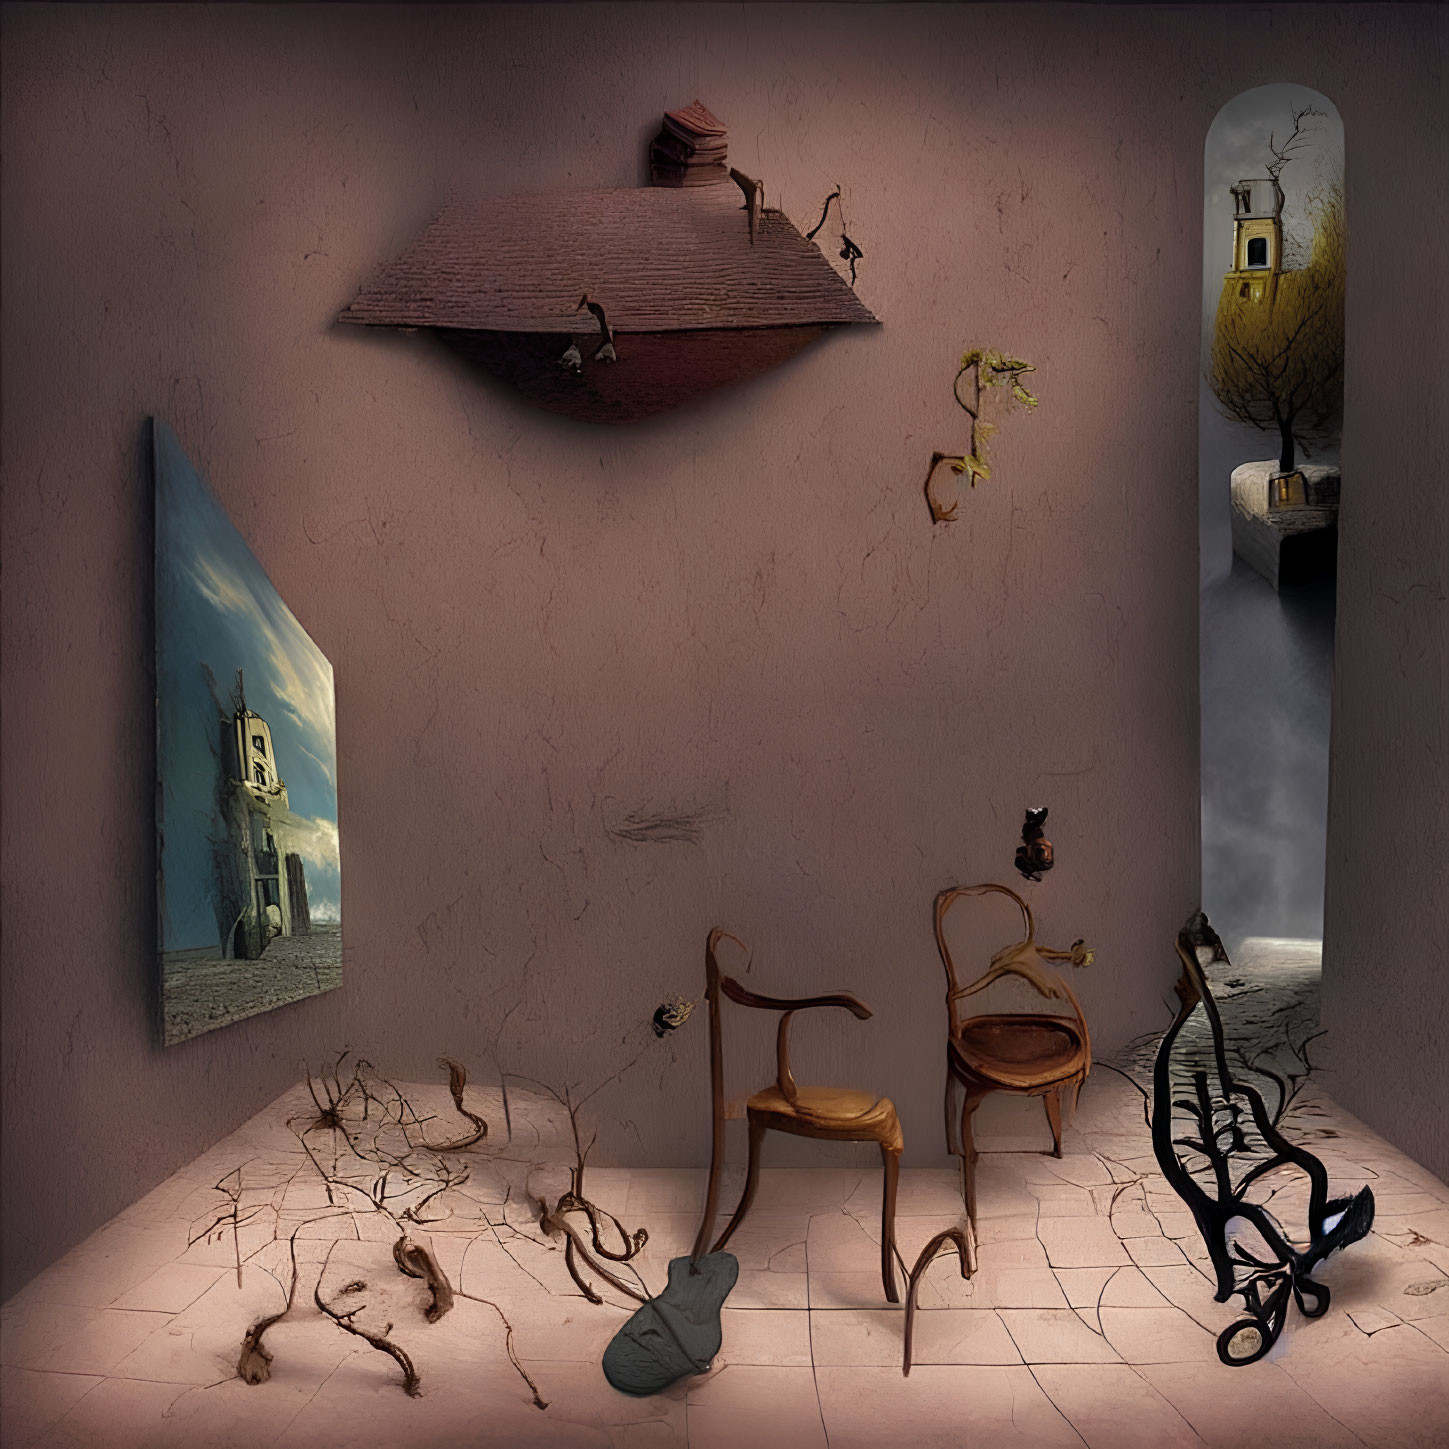 Surreal Room with Distorted Furniture, Cat Paintings, Gravity-Defying Cats, and